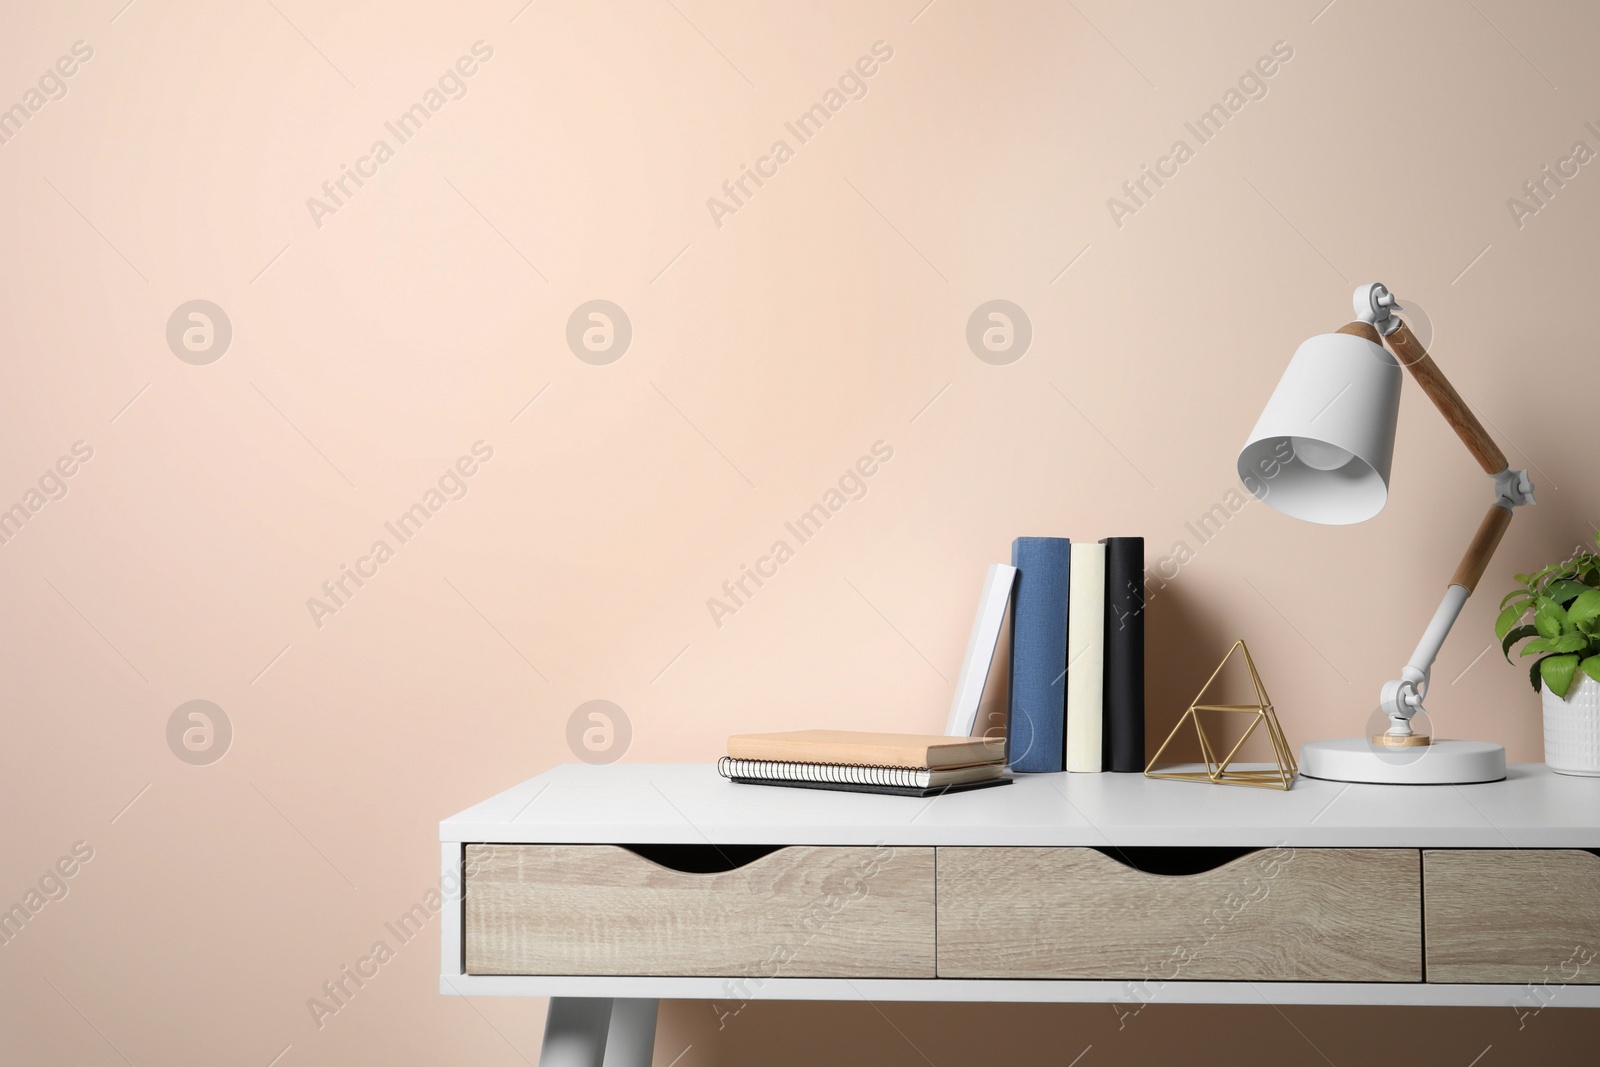 Photo of Stylish modern desk lamp, books and plant on table near beige wall indoors, space for text